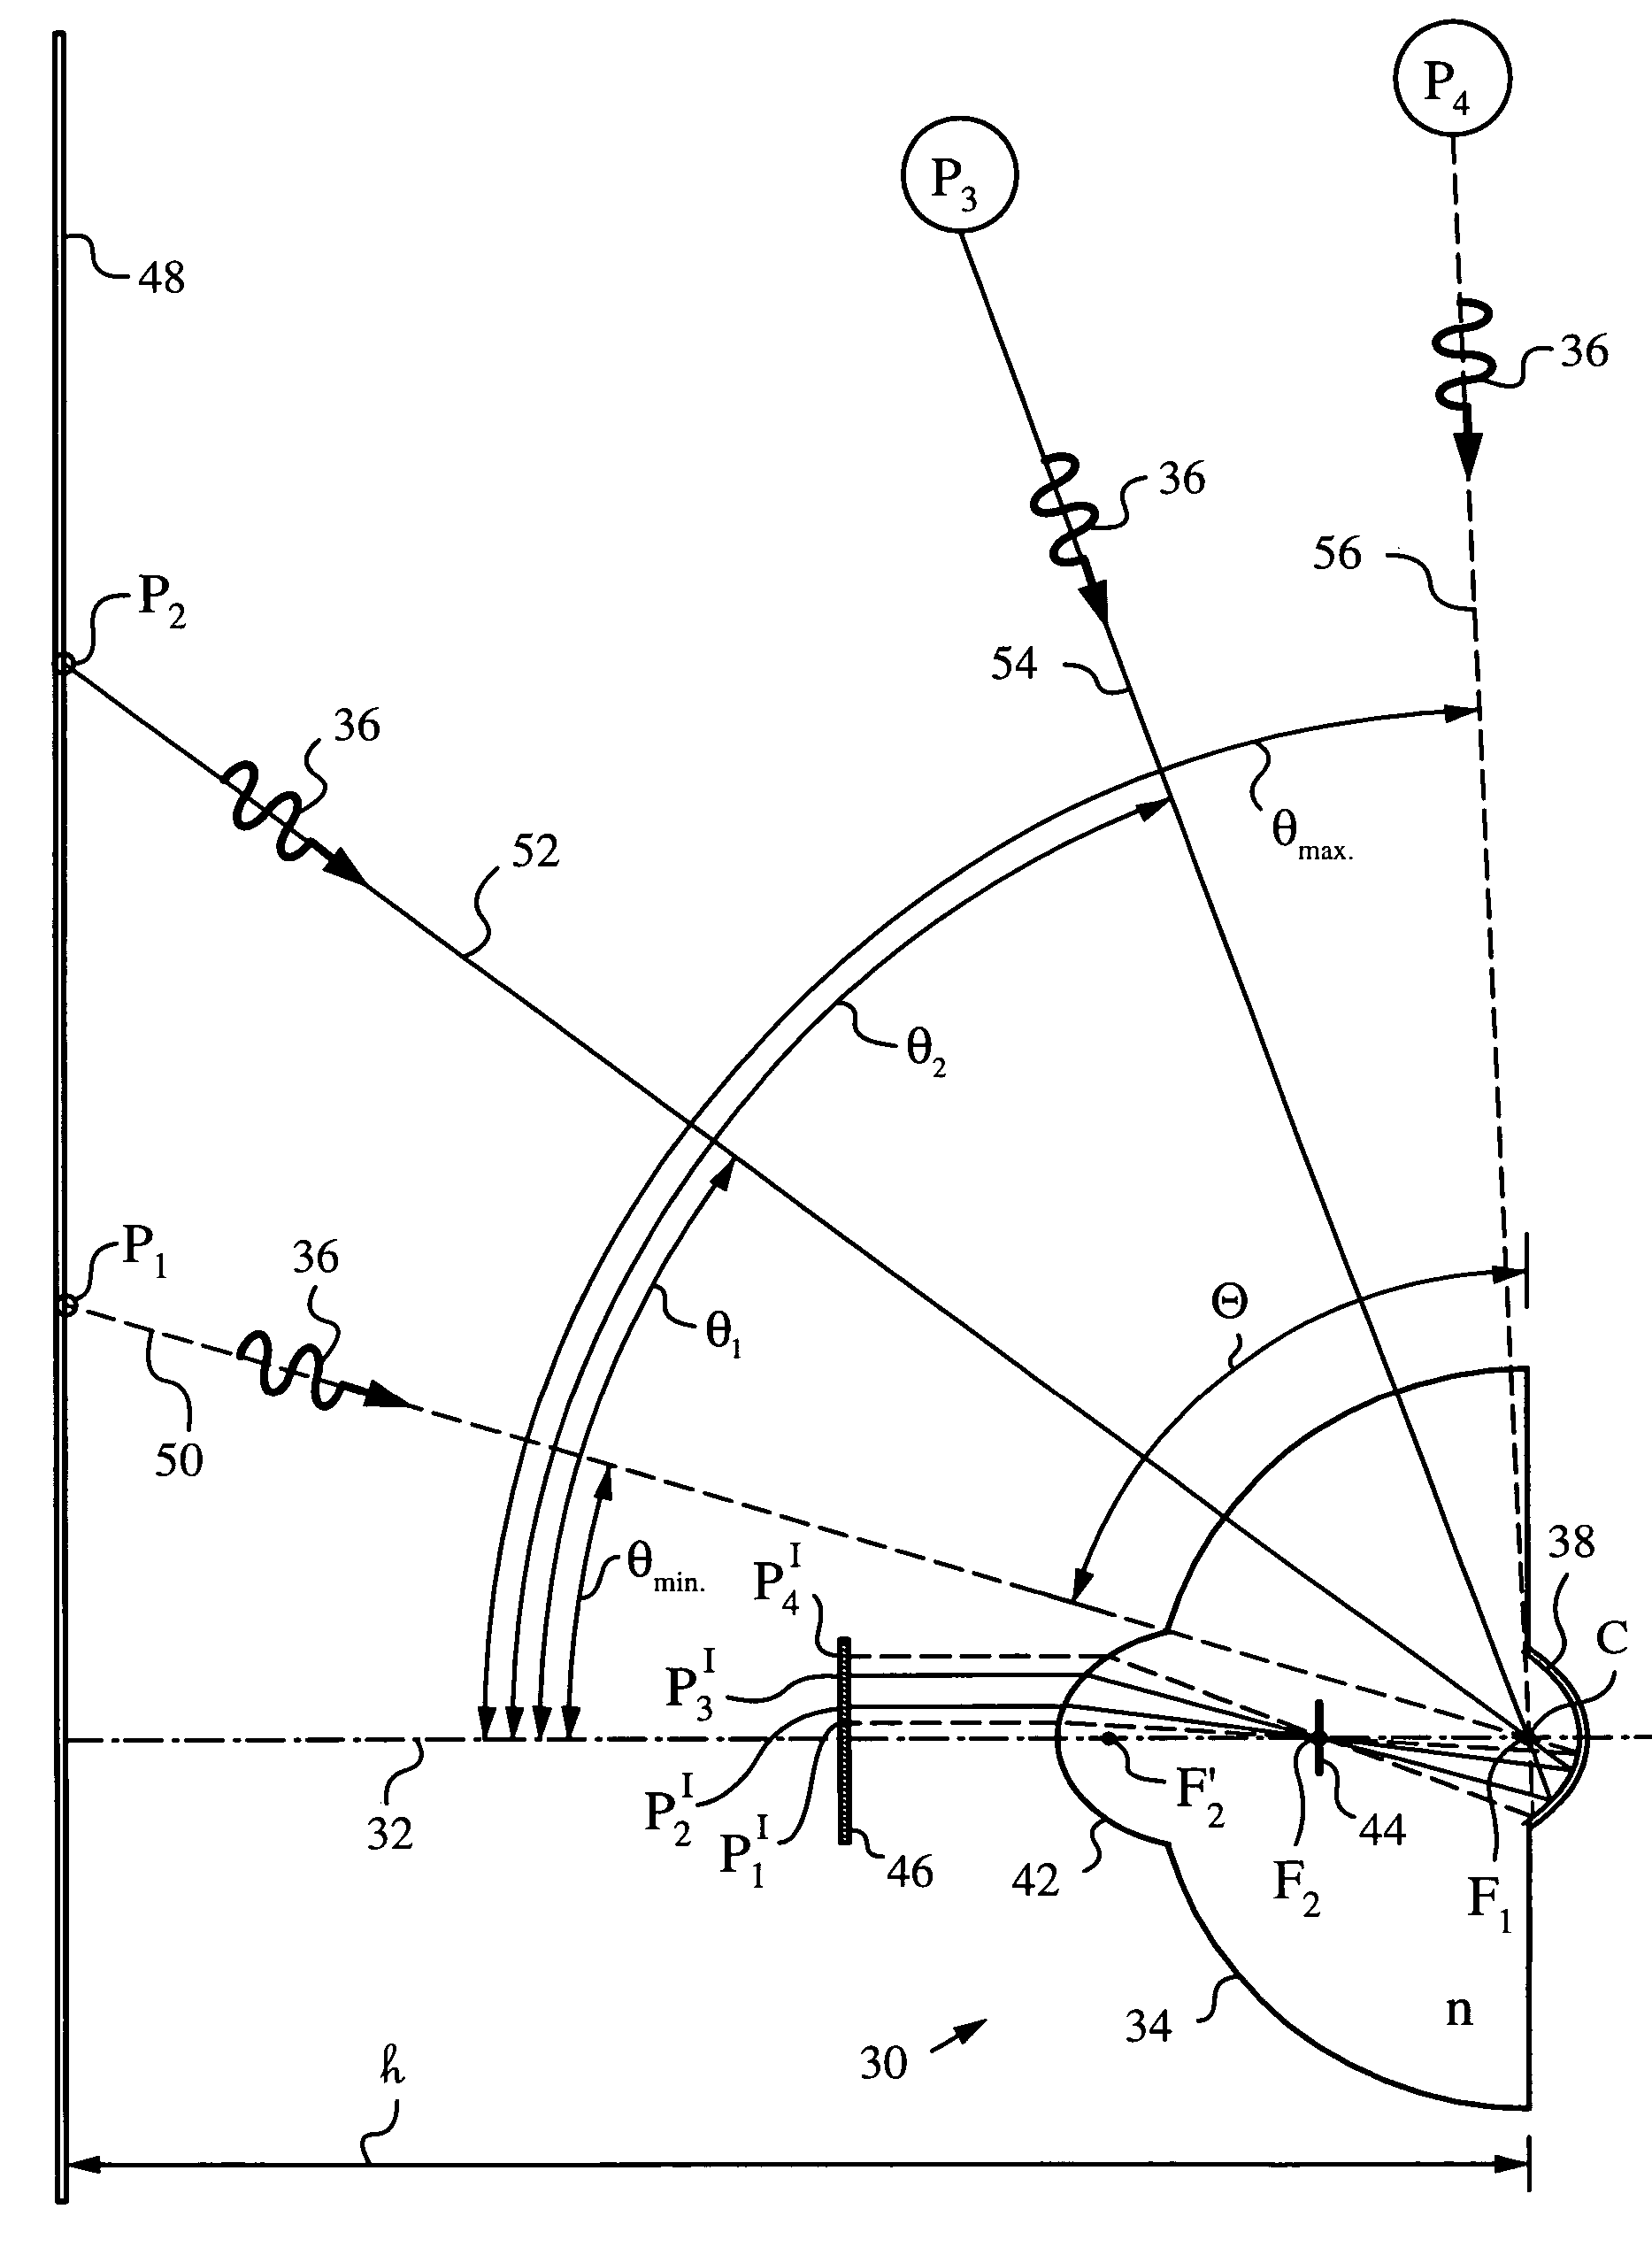 Solid catadioptric lens with a single viewpoint